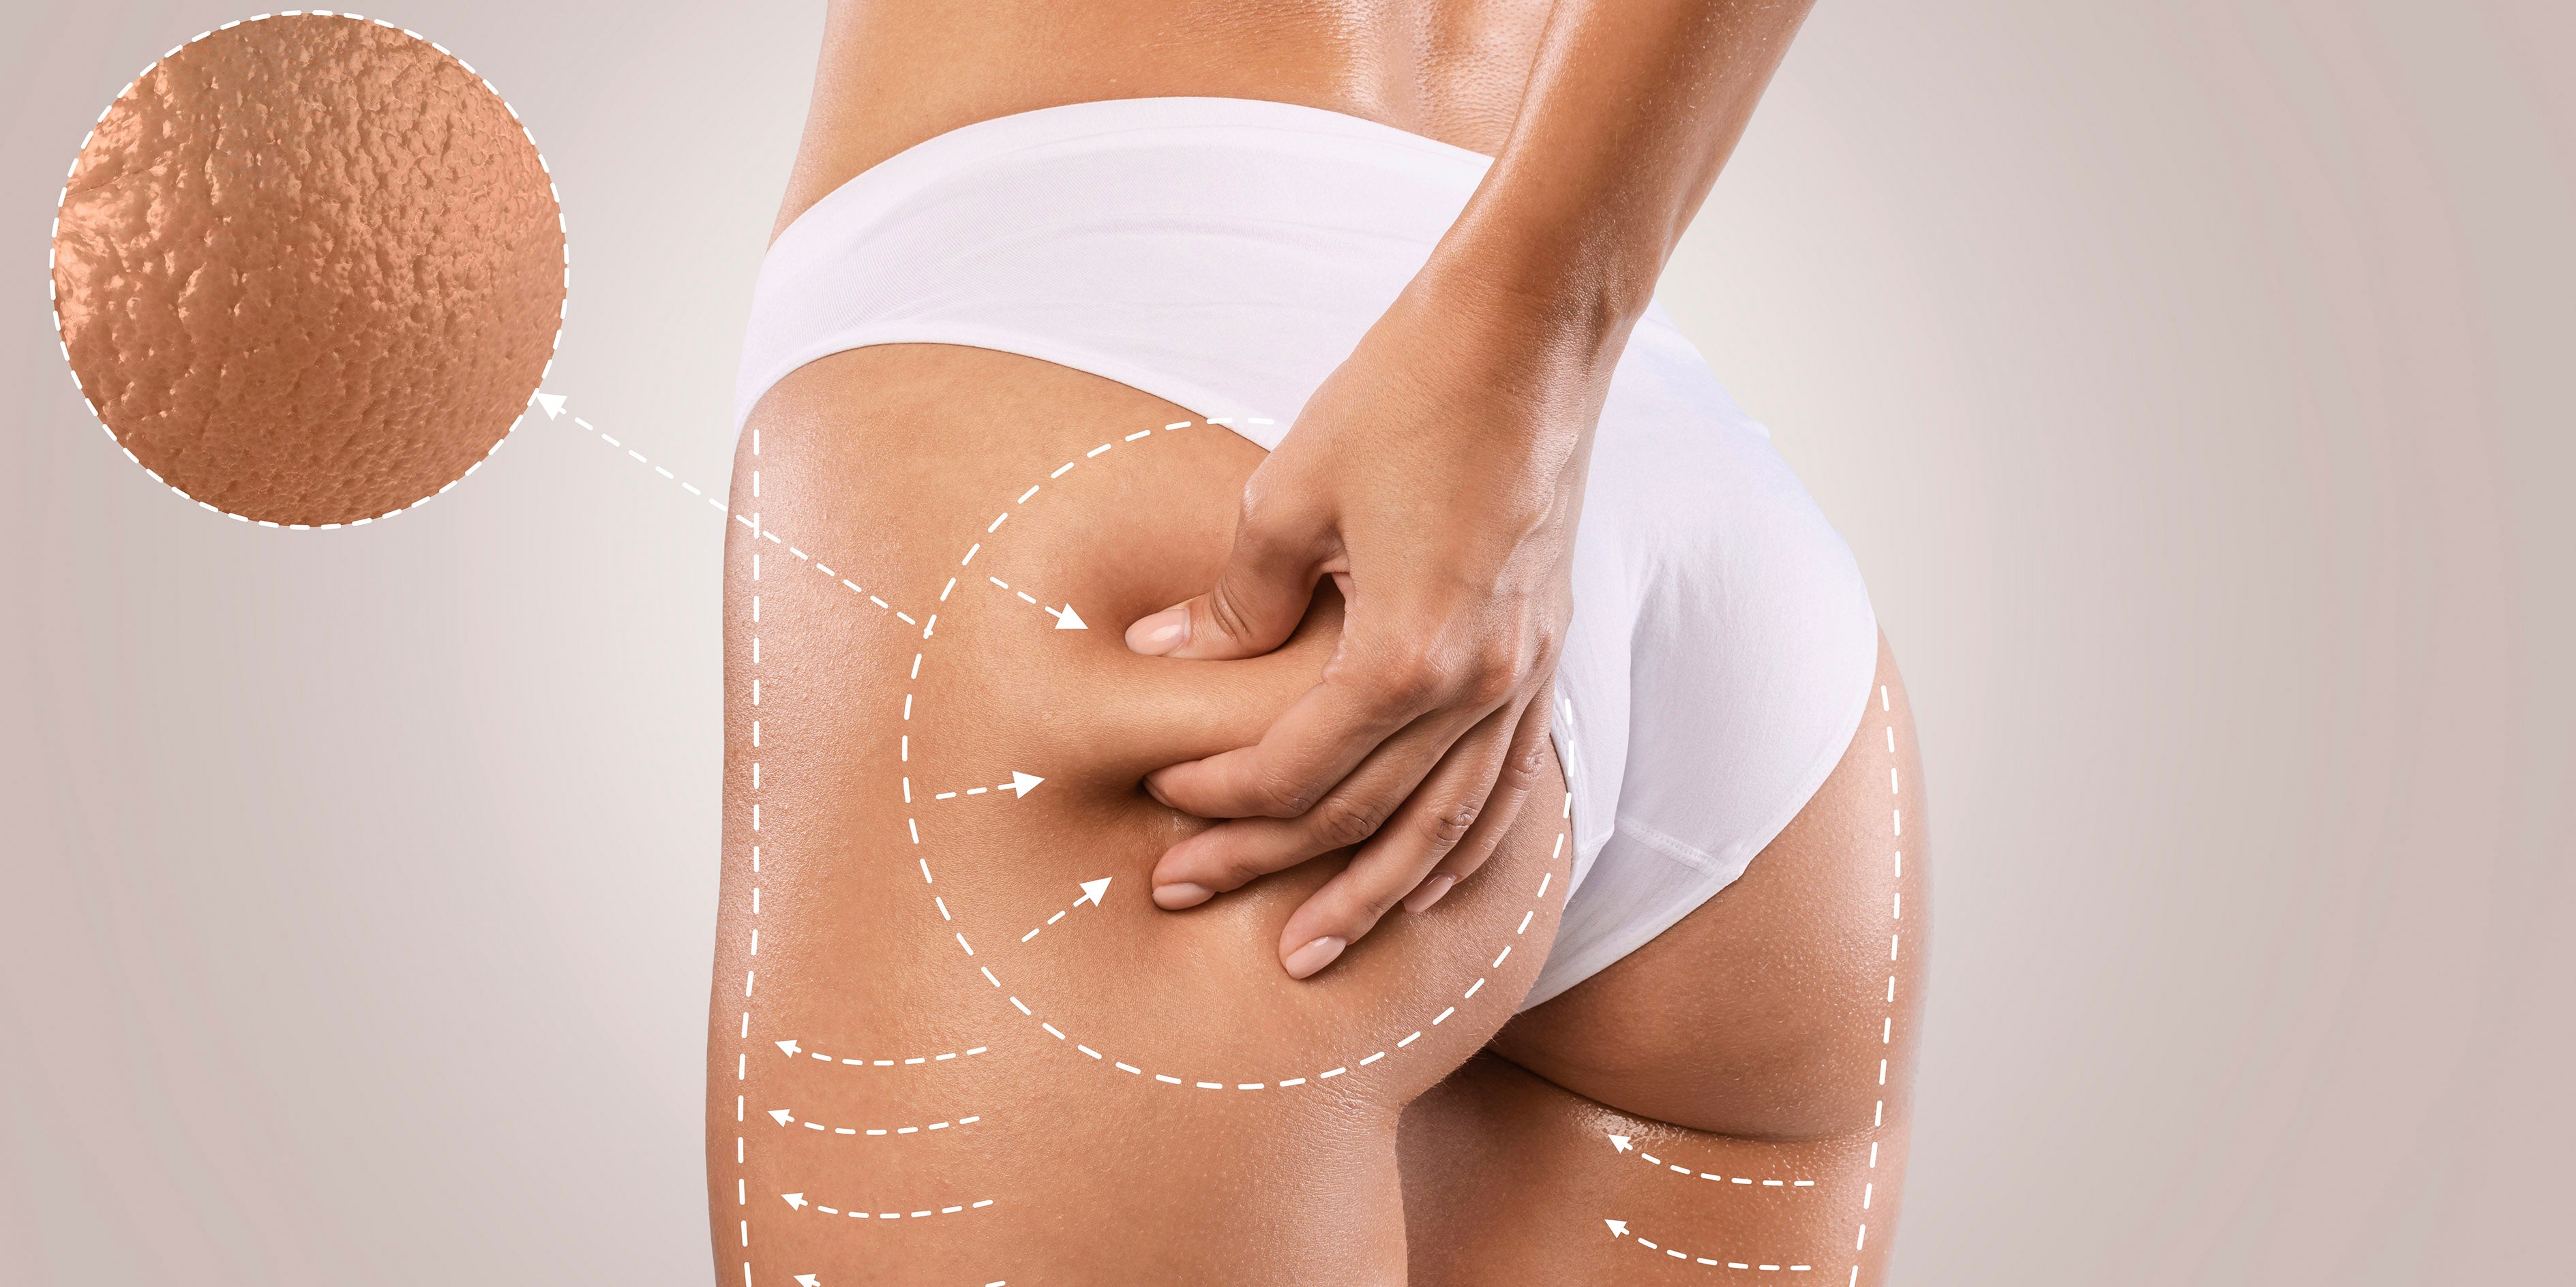 How to Get Rid of Cellulite: The Top 7 Effective Solutions You